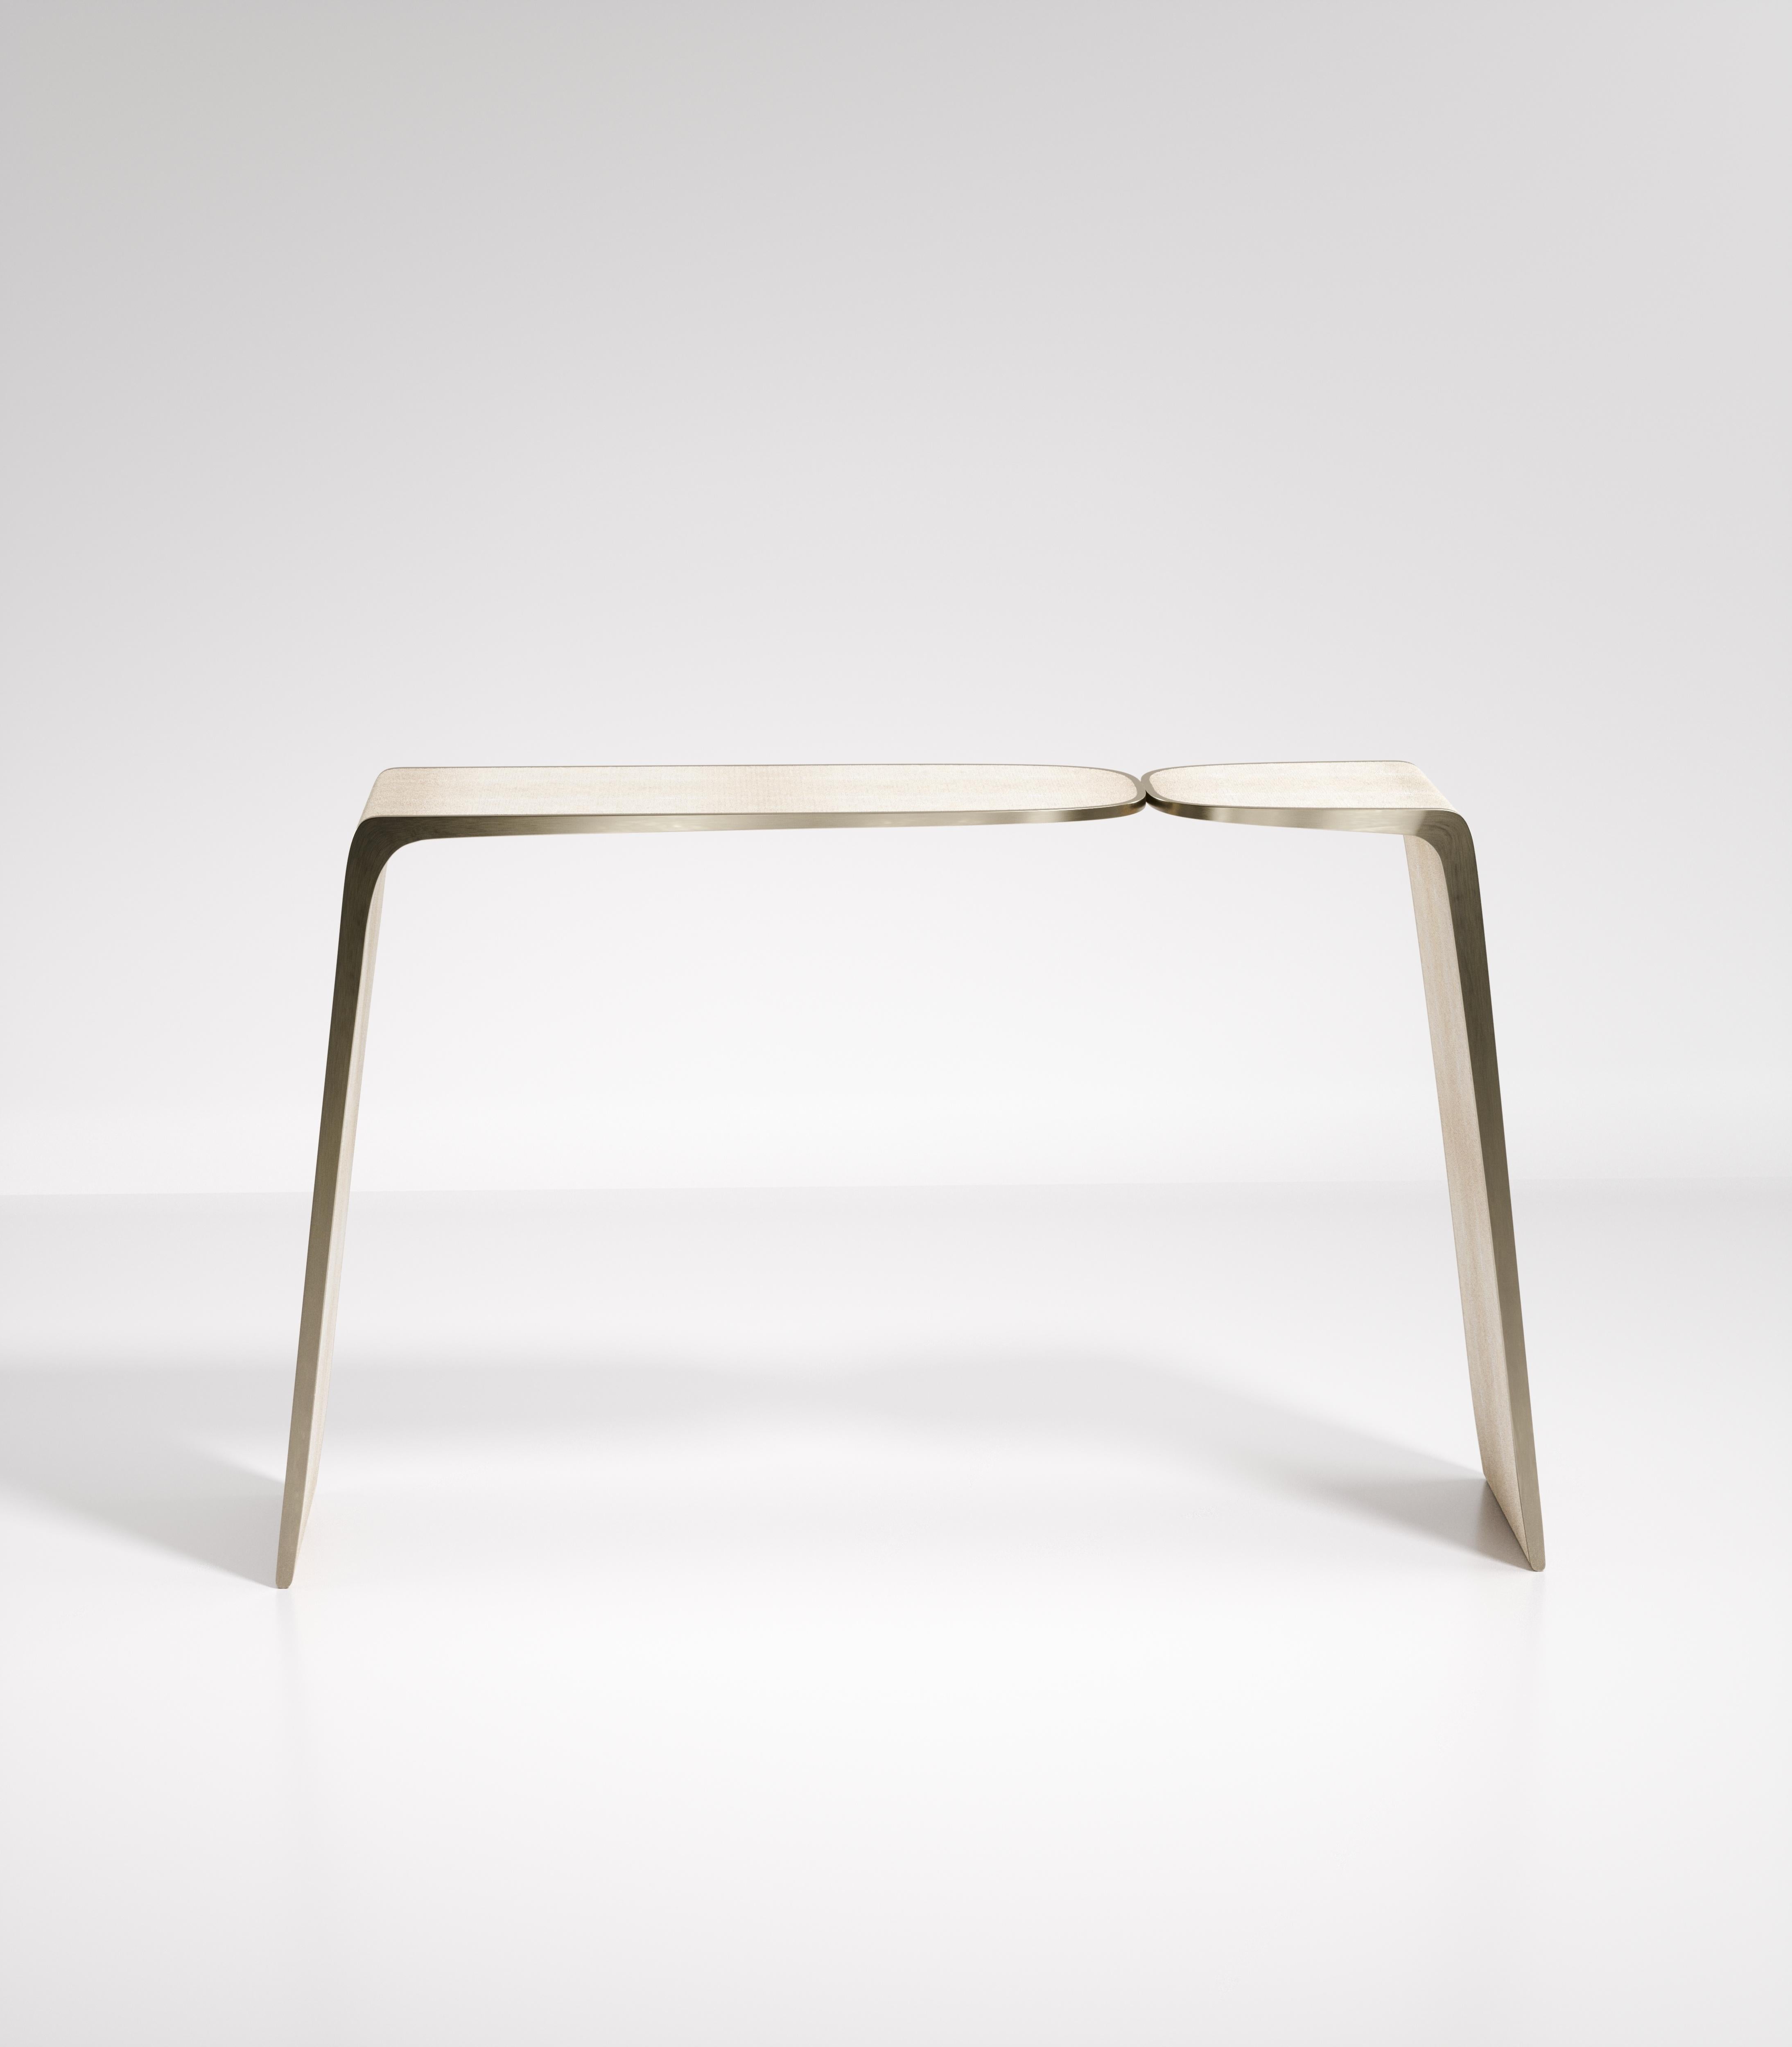 The Kiss console by Kifu Paris is an elegant and organic piece in it's unique design. The cream shagreen inlaid piece curves inwards to create the 